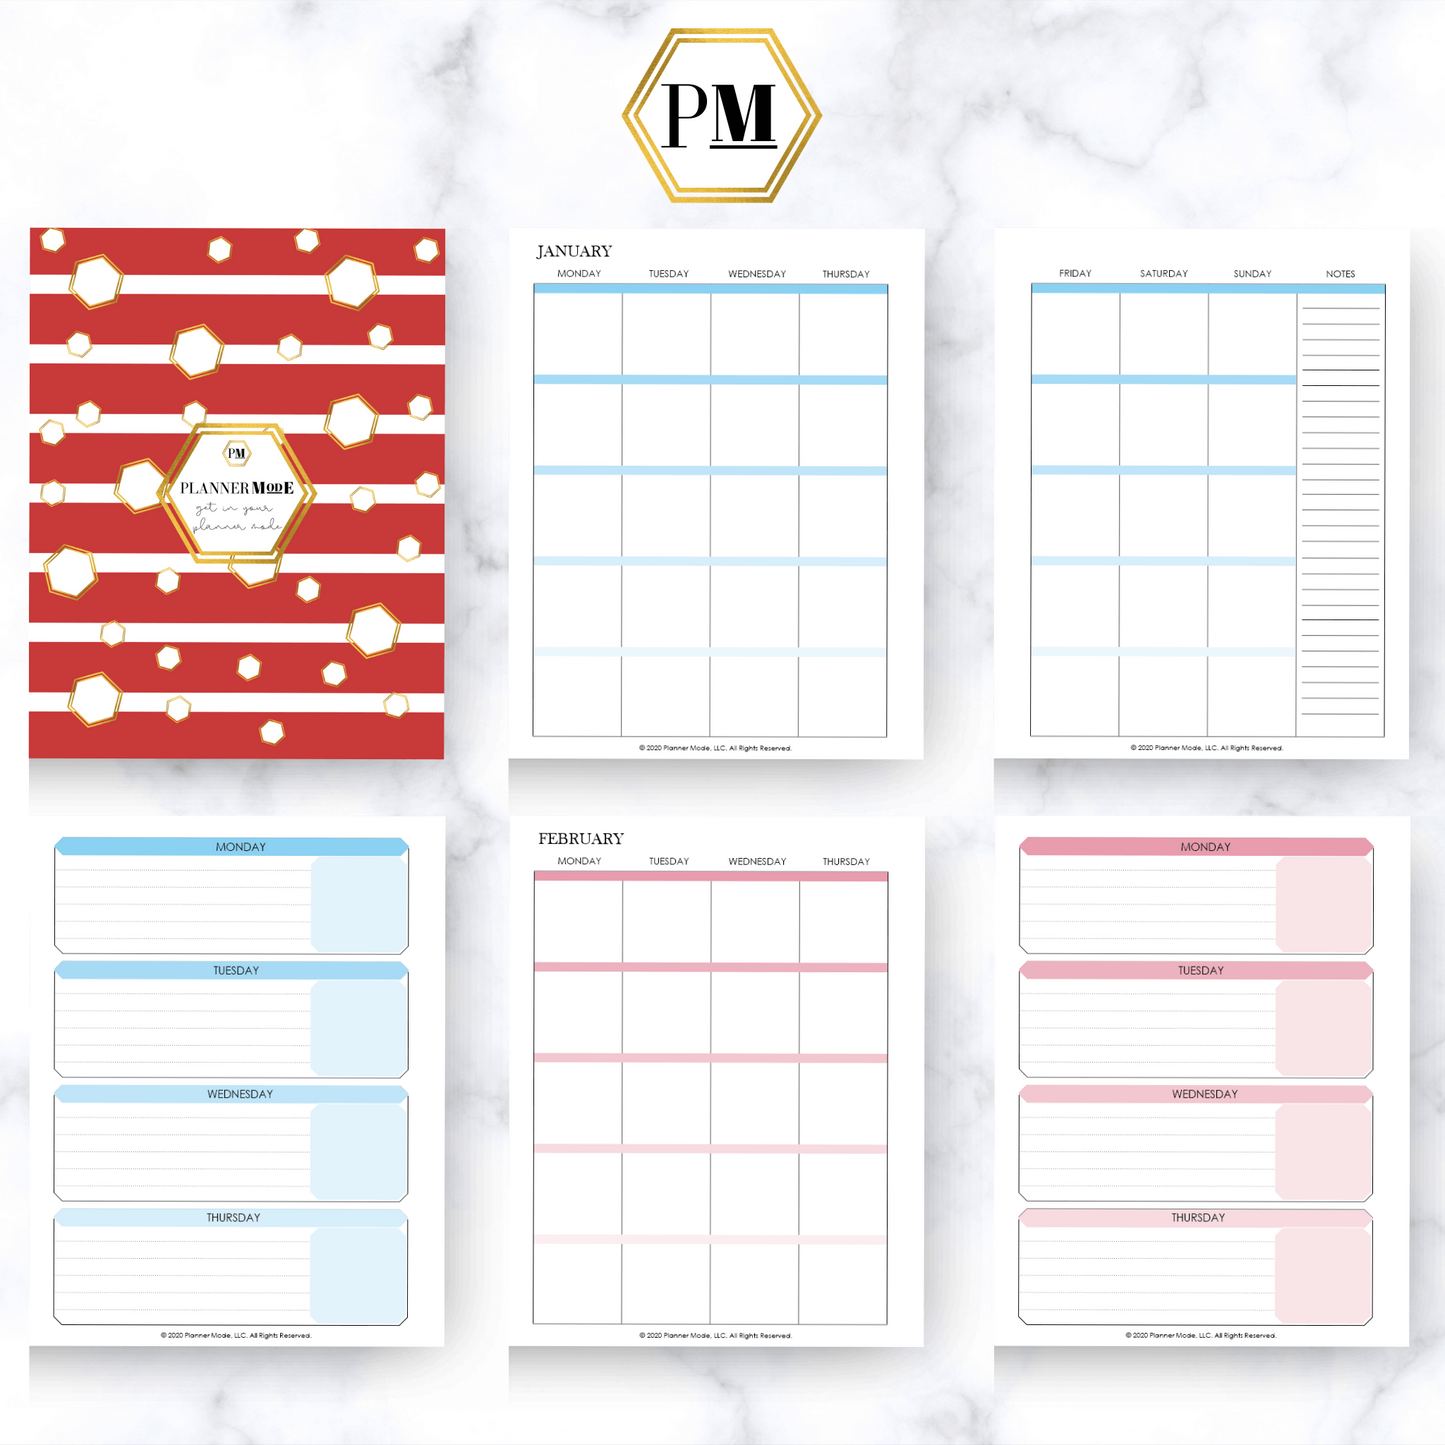 Red Hexagon Lifestyle Mode Planner